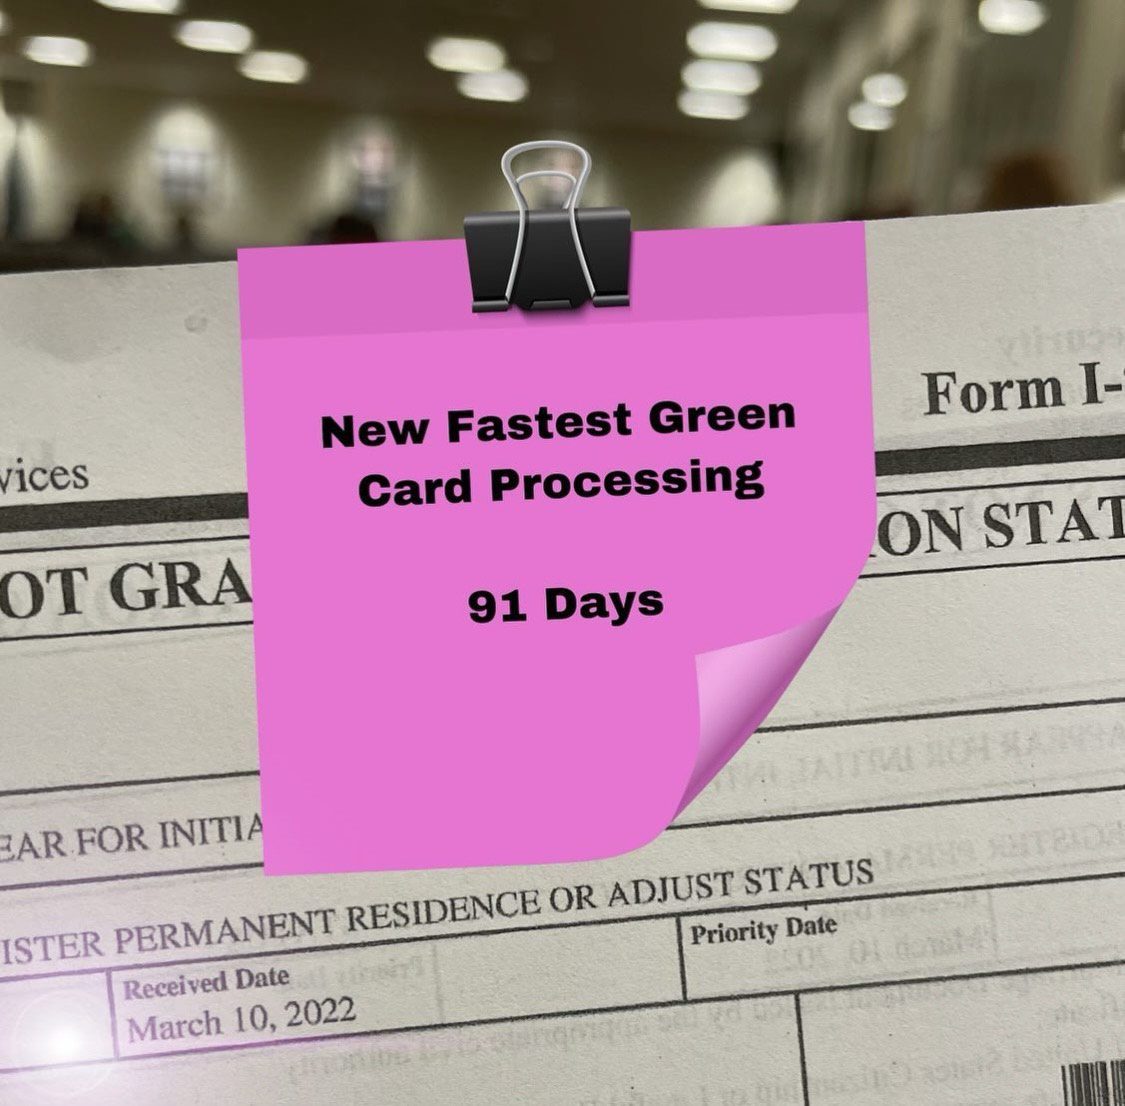 Green Card Approval in 91 Days!